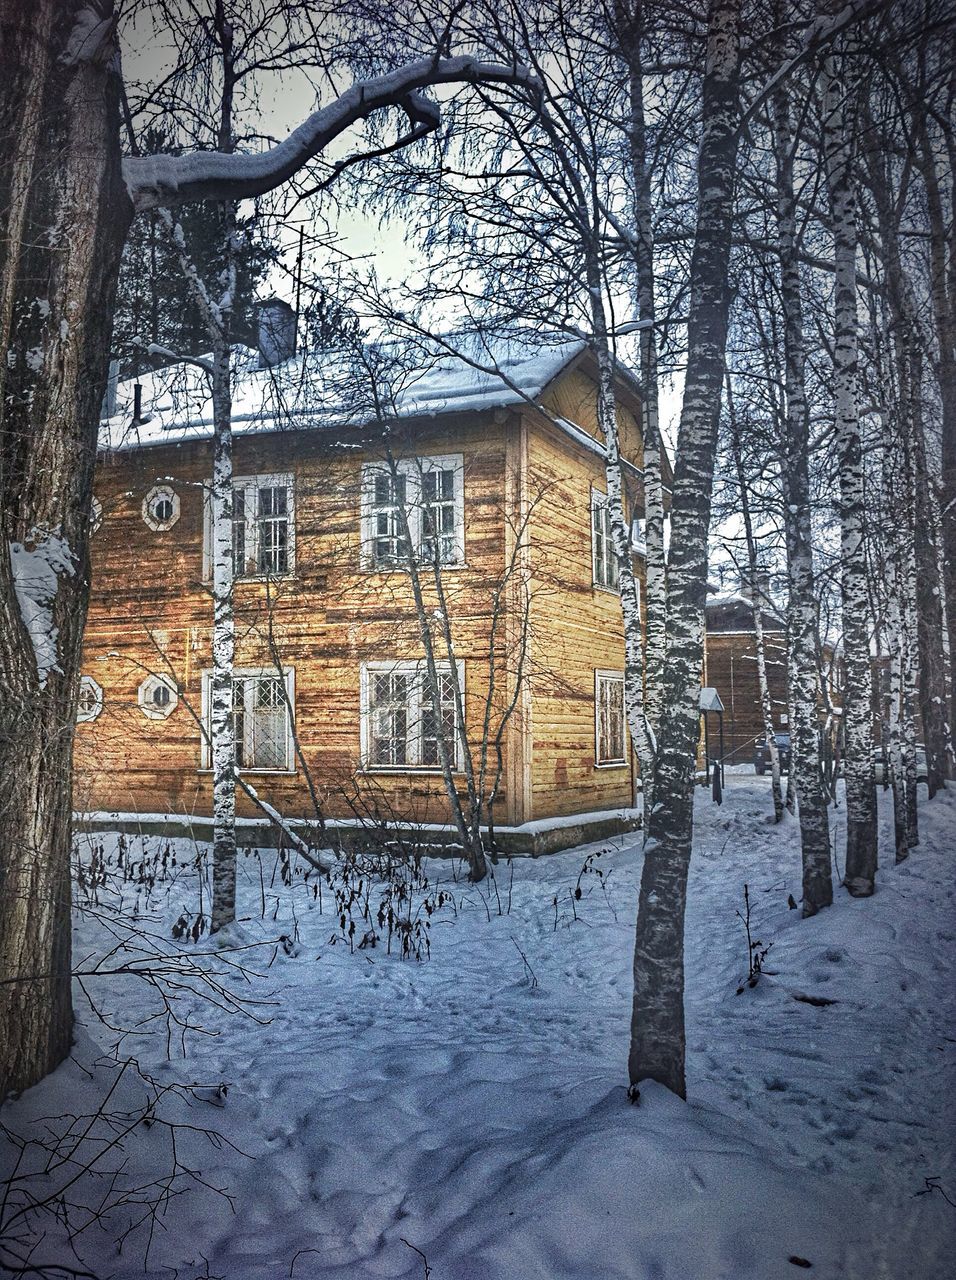 architecture, building exterior, built structure, bare tree, tree, house, branch, residential building, residential structure, window, old, snow, building, day, cold temperature, winter, outdoors, street, no people, abandoned